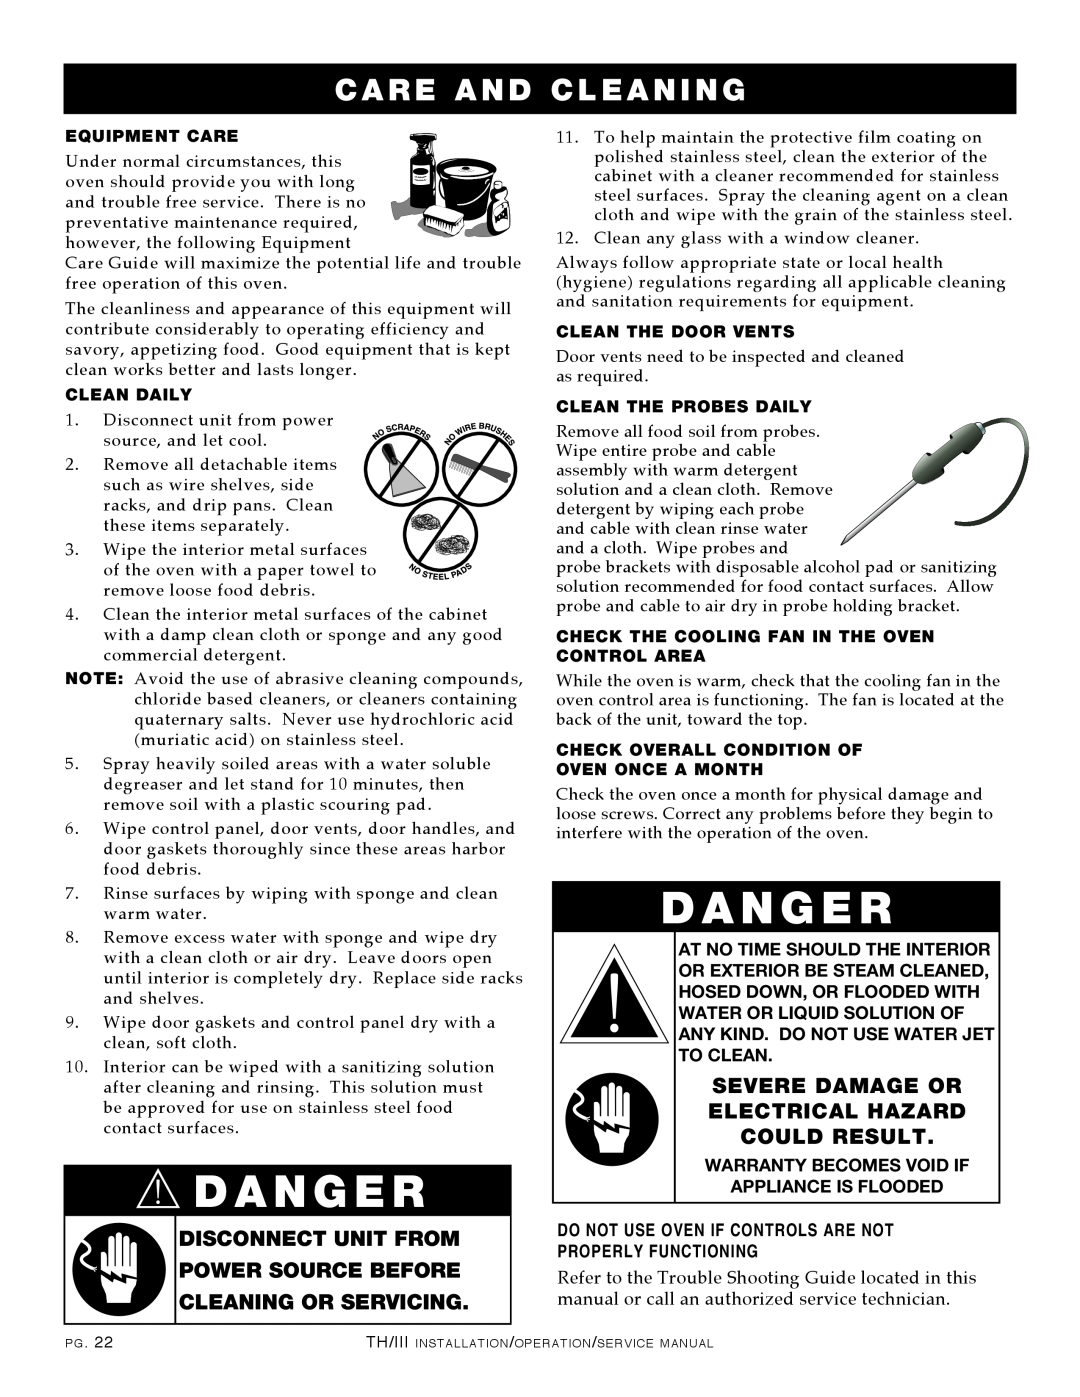 Alto-Shaam 1000-TH/III, 500-TH/III manual Danger, D A N G E R, Care And Cleaning, Disconnect Unit From Power Source Before 